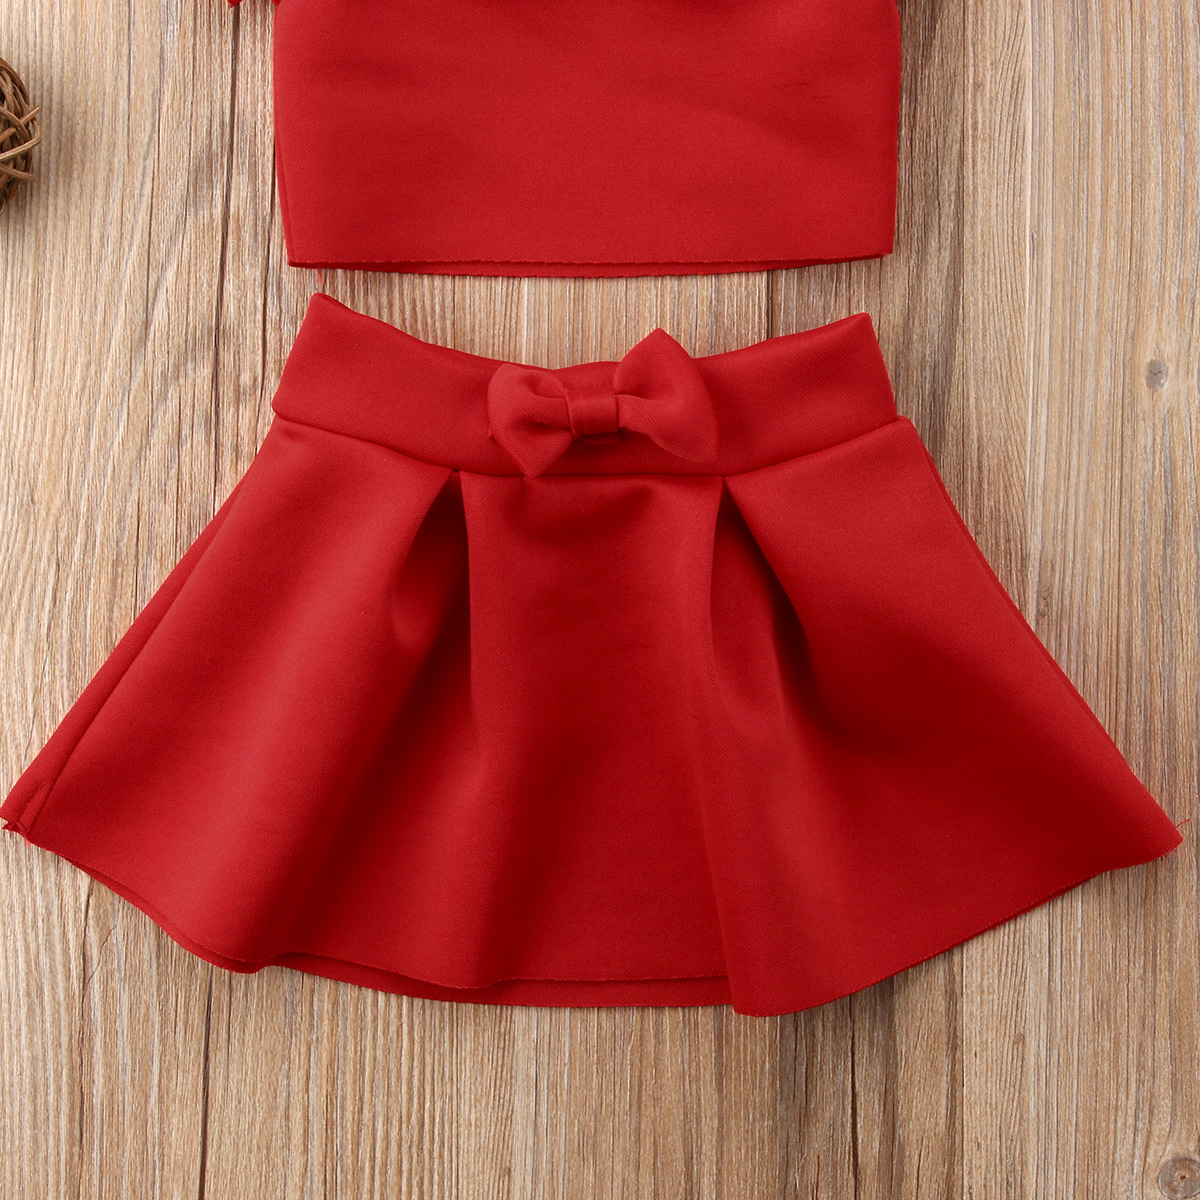 2020 New Fashion Girls Red Clothes Sets Toddler Kids Off Shoulder Tops Bow Skirt 2pcs Summer Outfits Clothing for 0-4Years